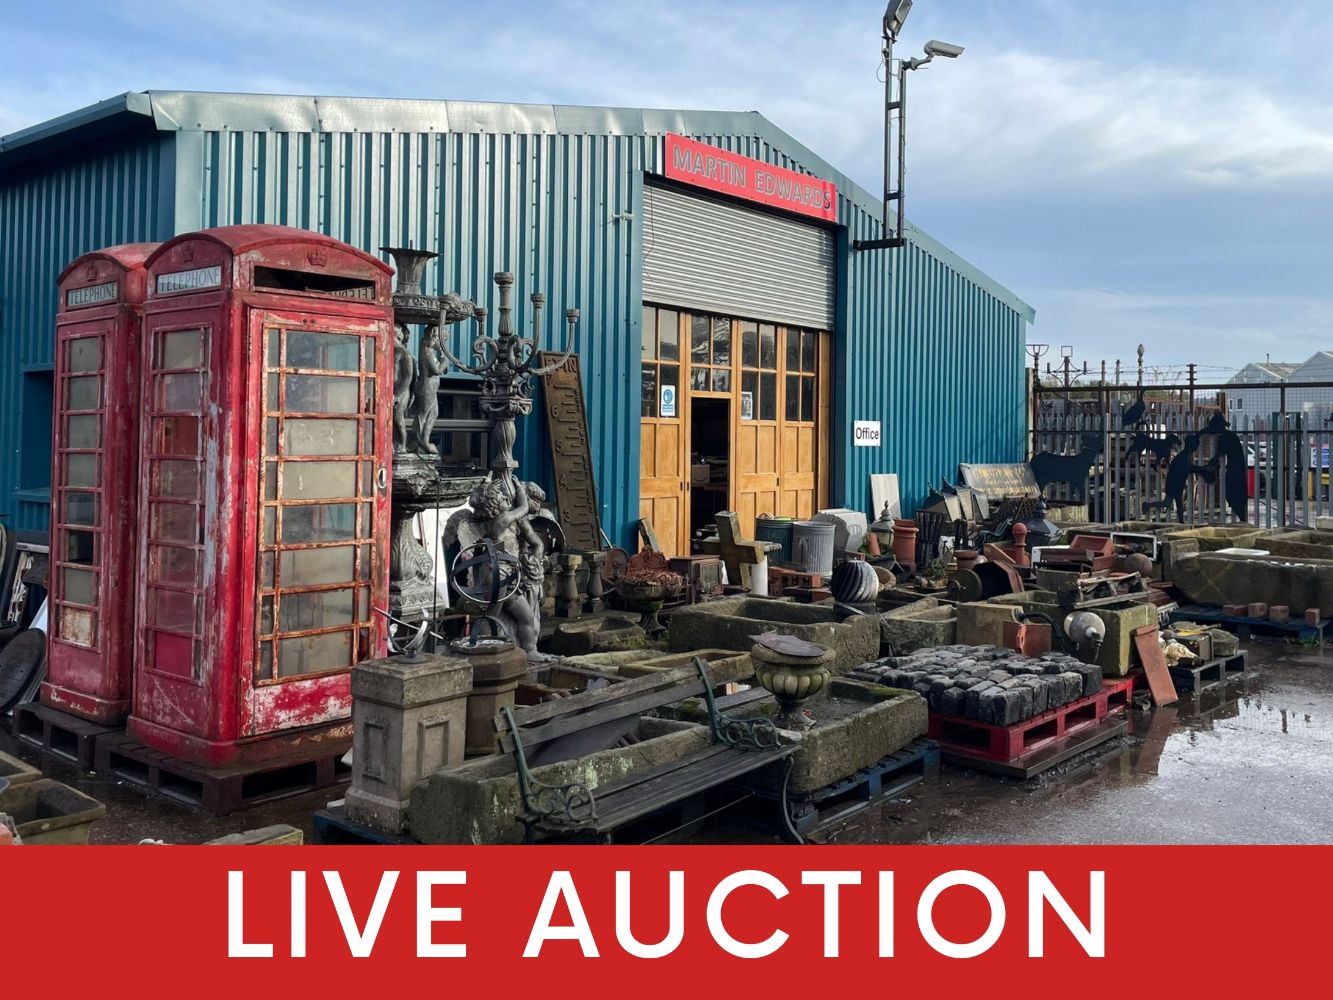 Unreserved Seasonal Clearance Auction of Architectural Salvage and Building Materials - on behalf of Martin Edwards RBM